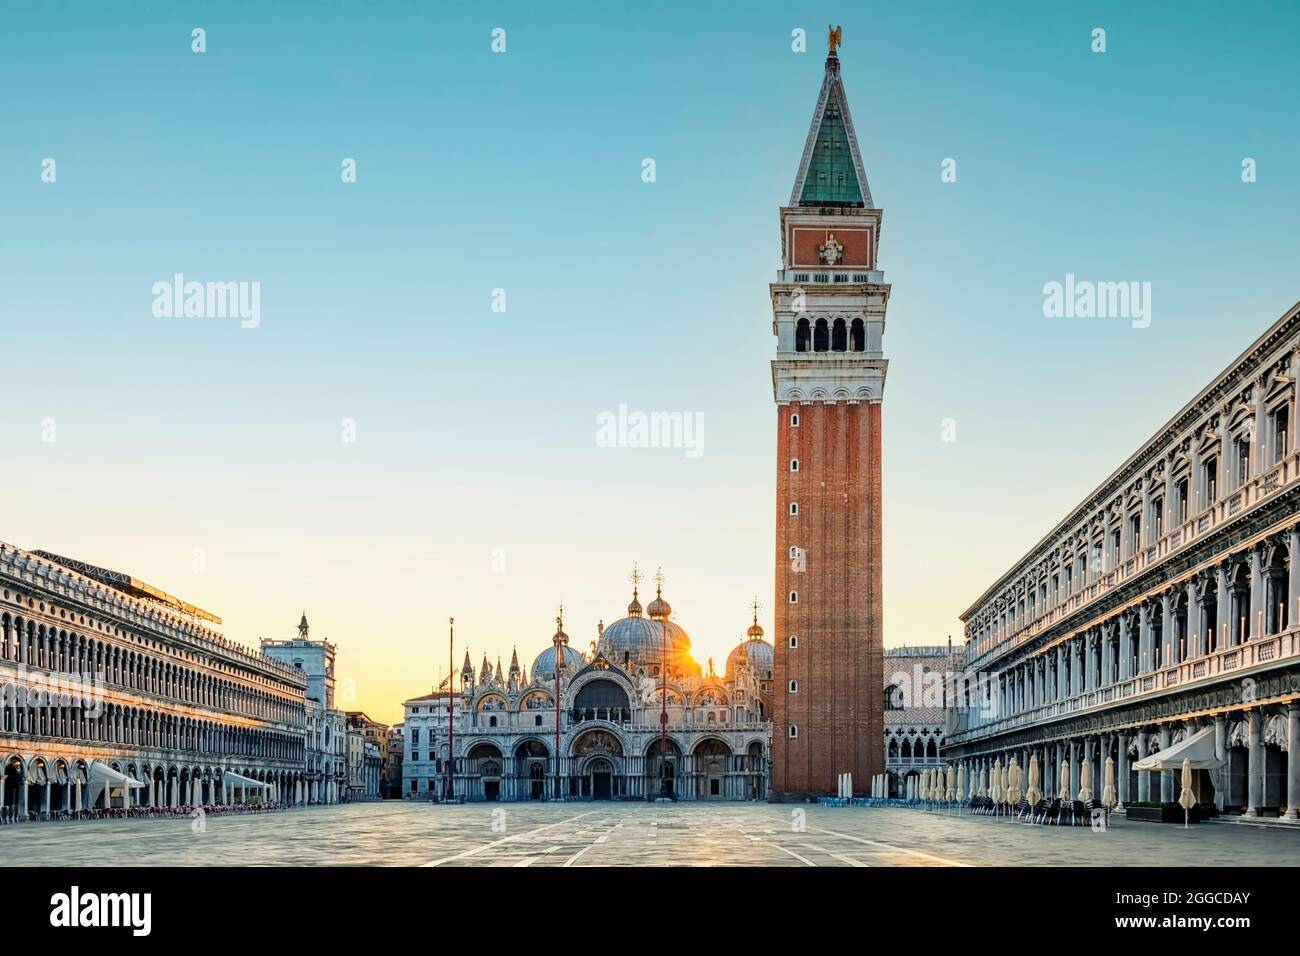 Piazza San Marco in Venice city, Italy Stock Photo